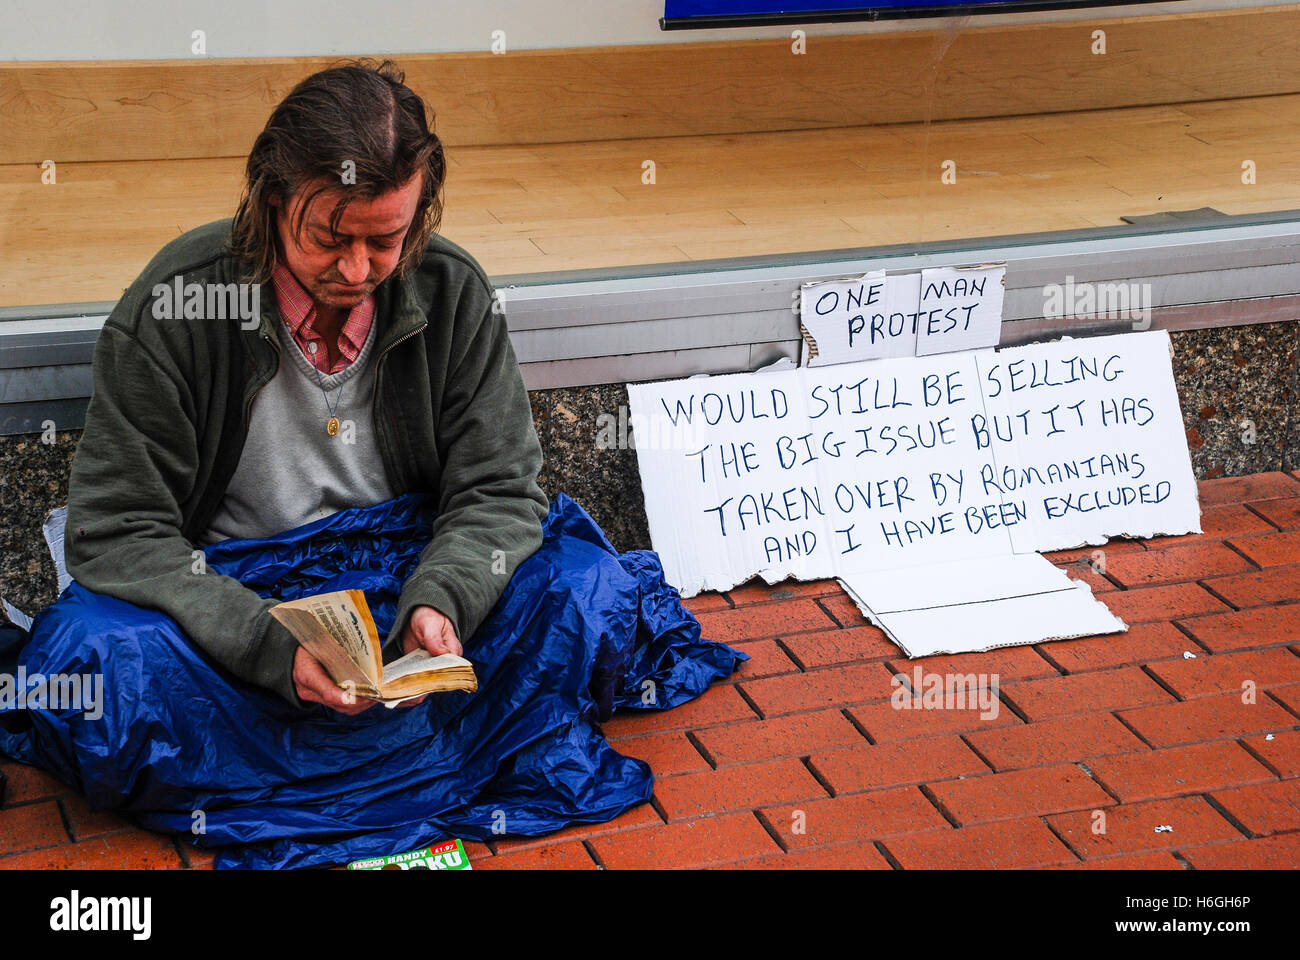 Homeless man protesting against Romainian immigrants who have taken his job selling the Big Issue. Stock Photo